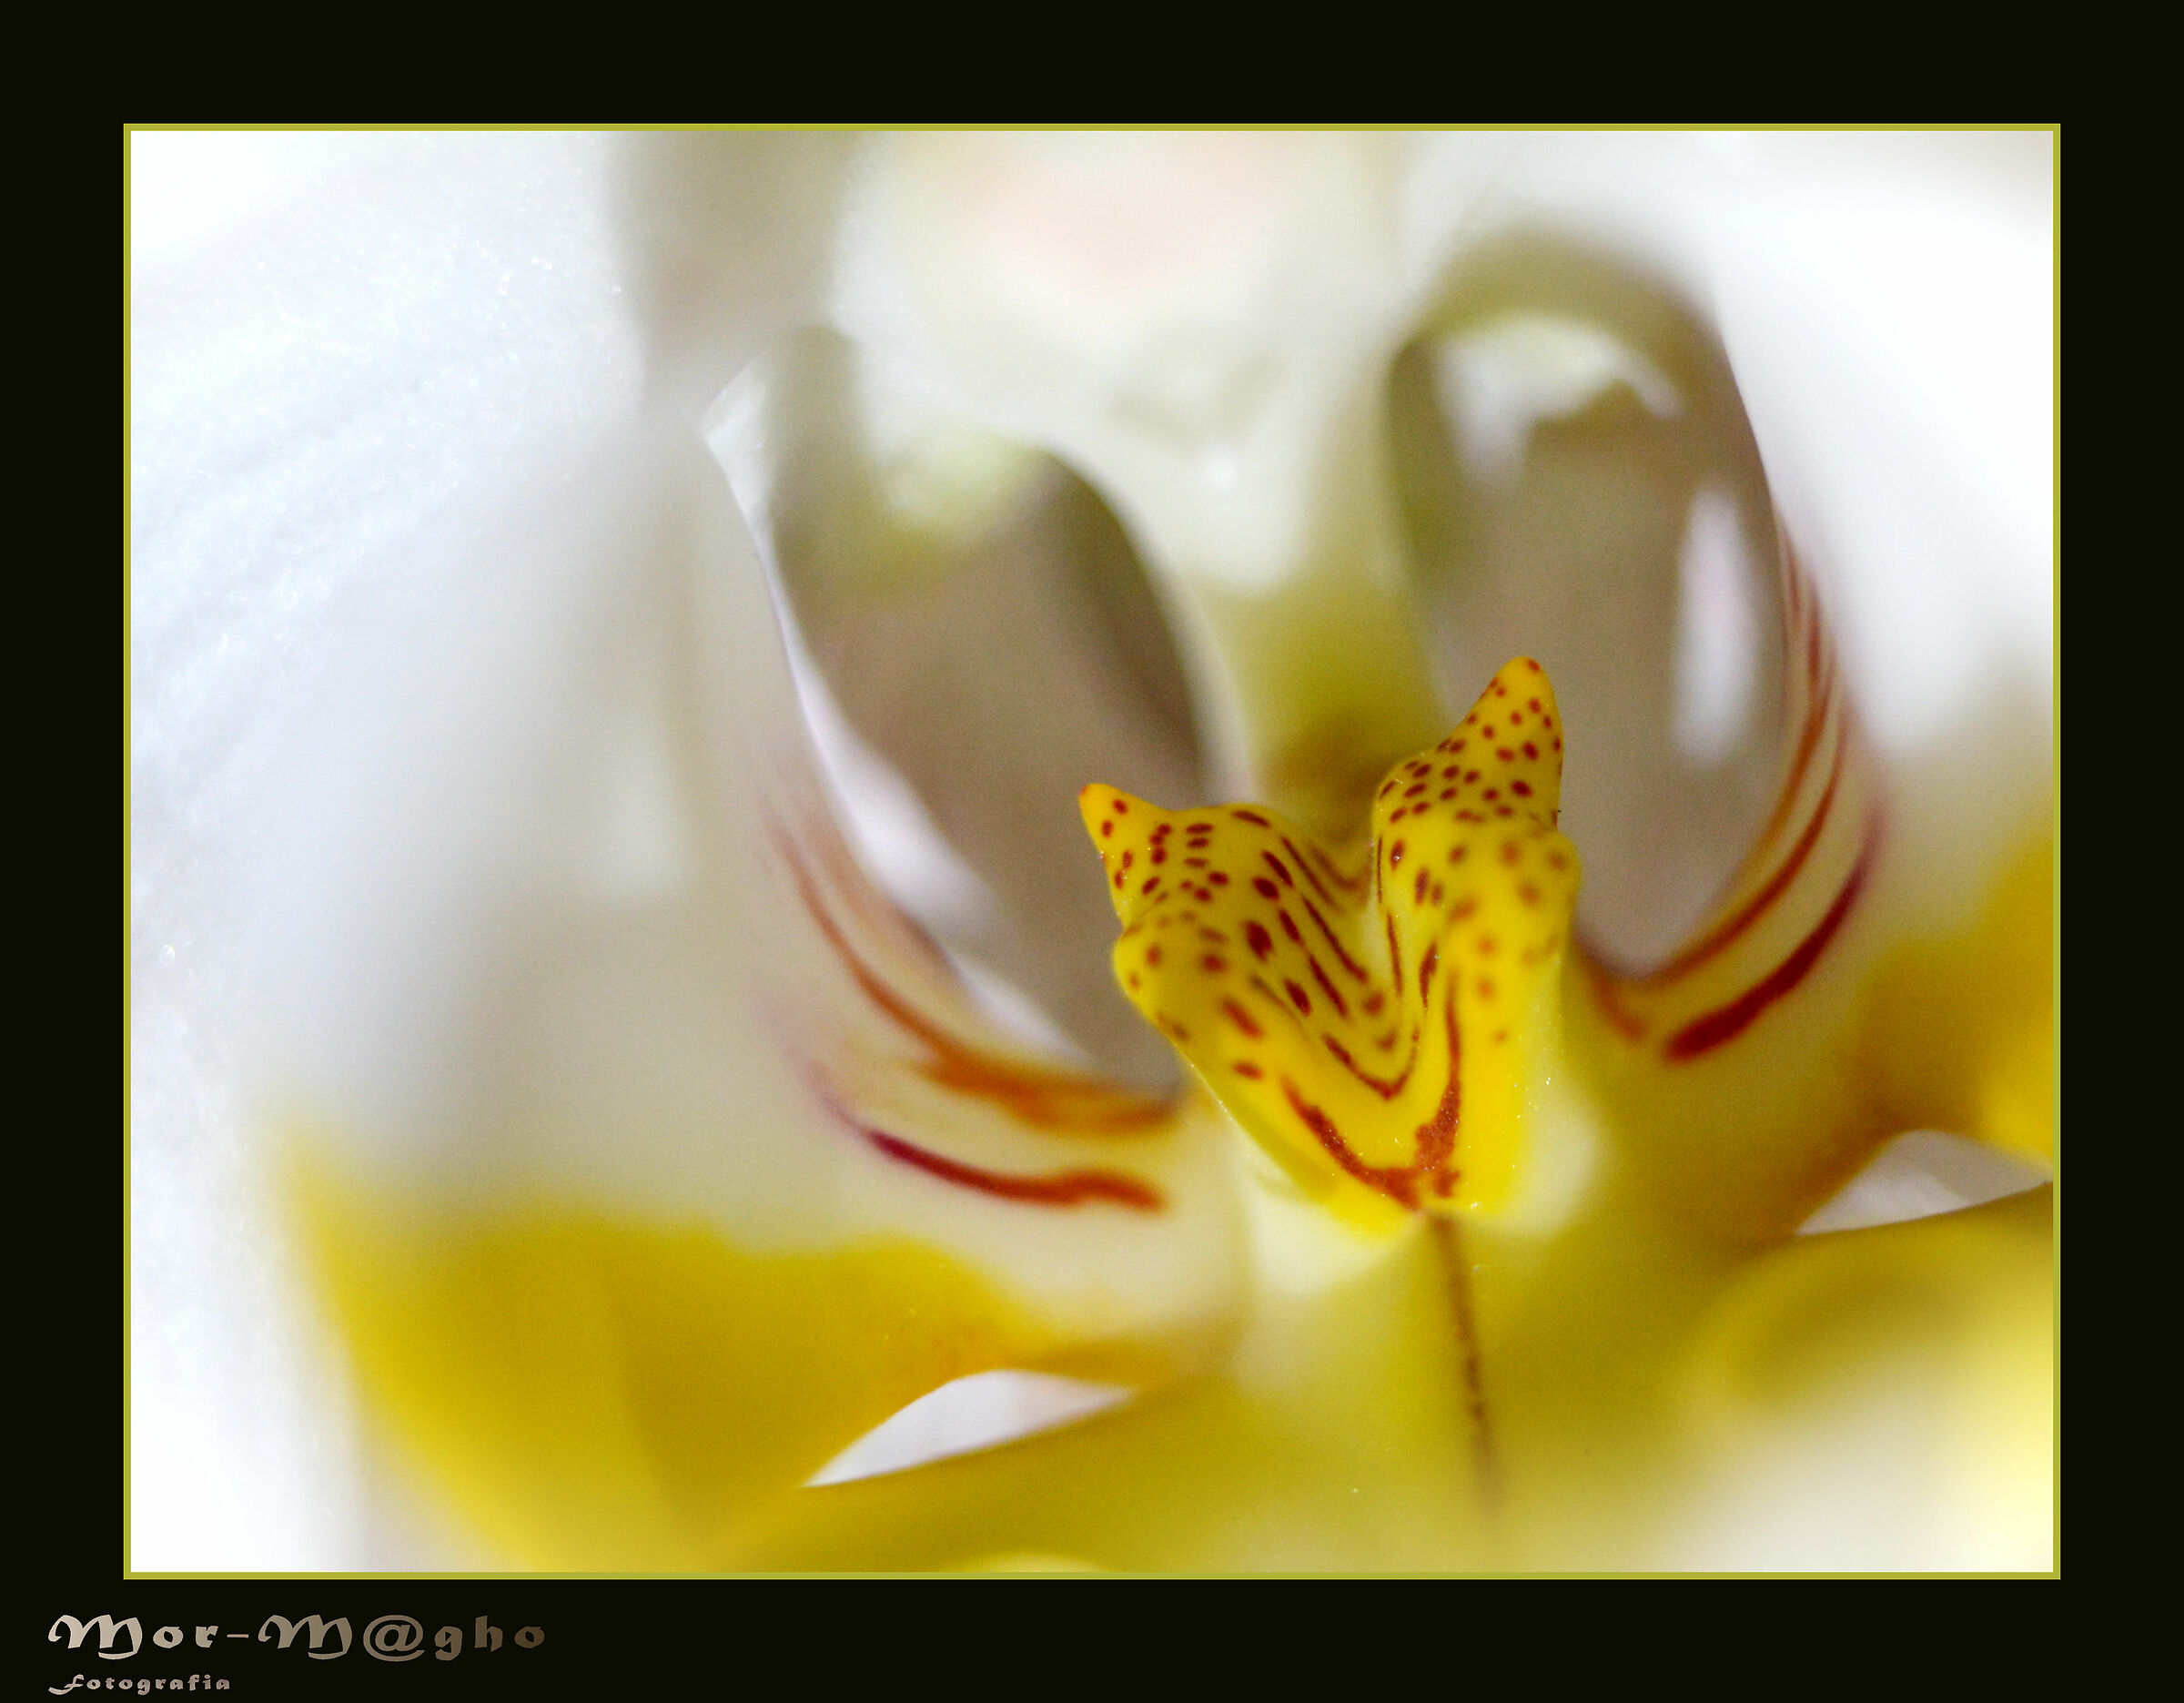 In the Orchid...